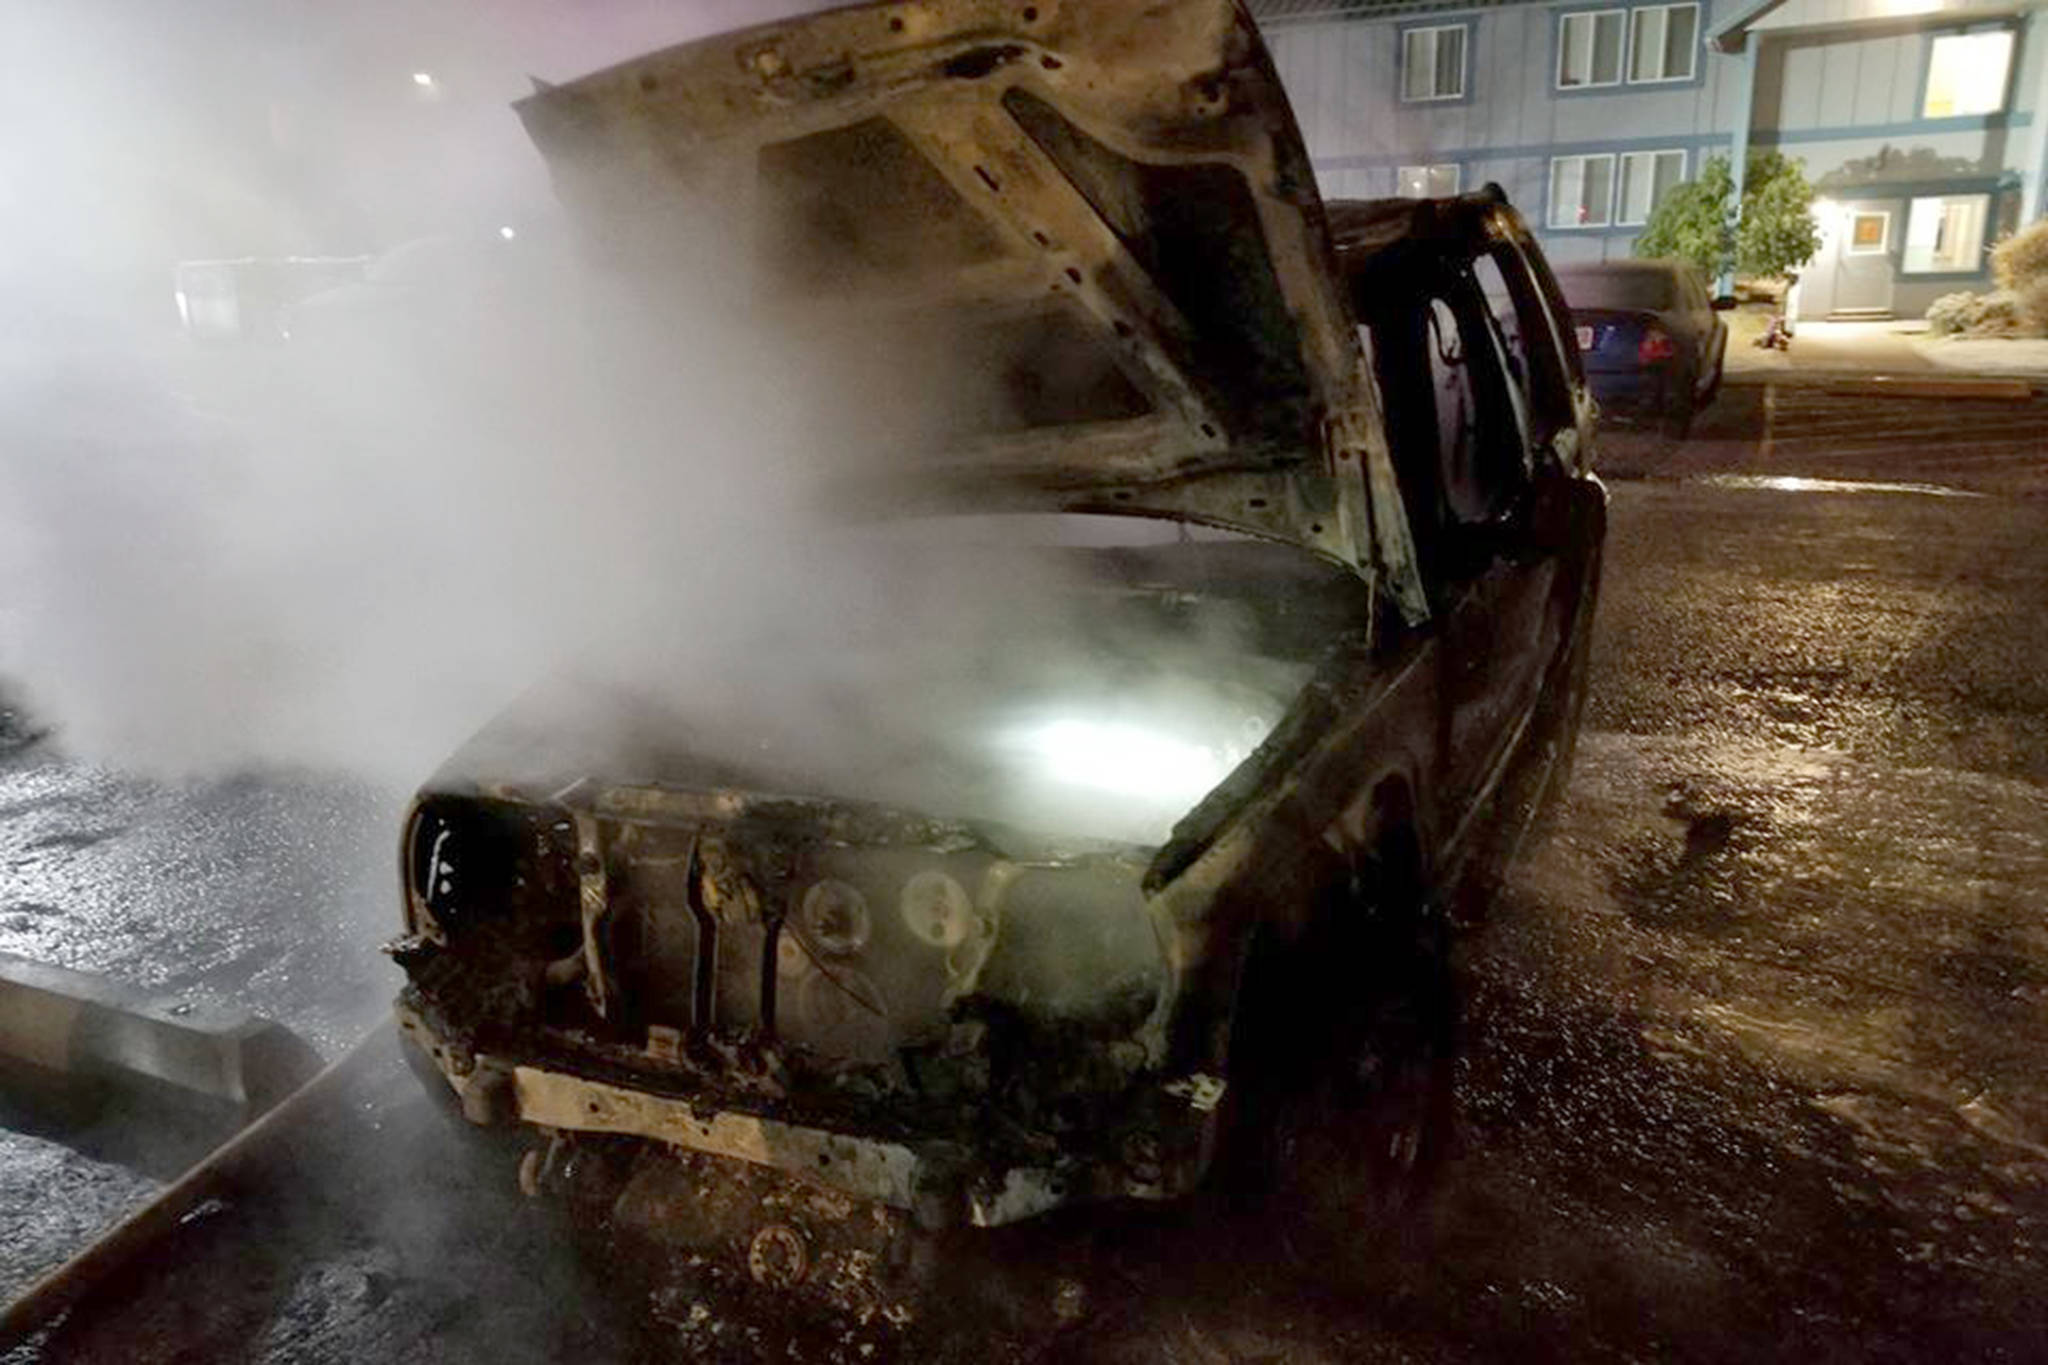 A Jeep Liberty is pictured after a fire in the early morning of Tuesday, Nov. 6, 2018. (Courtesy Photo | Capital City Fire/Rescue)